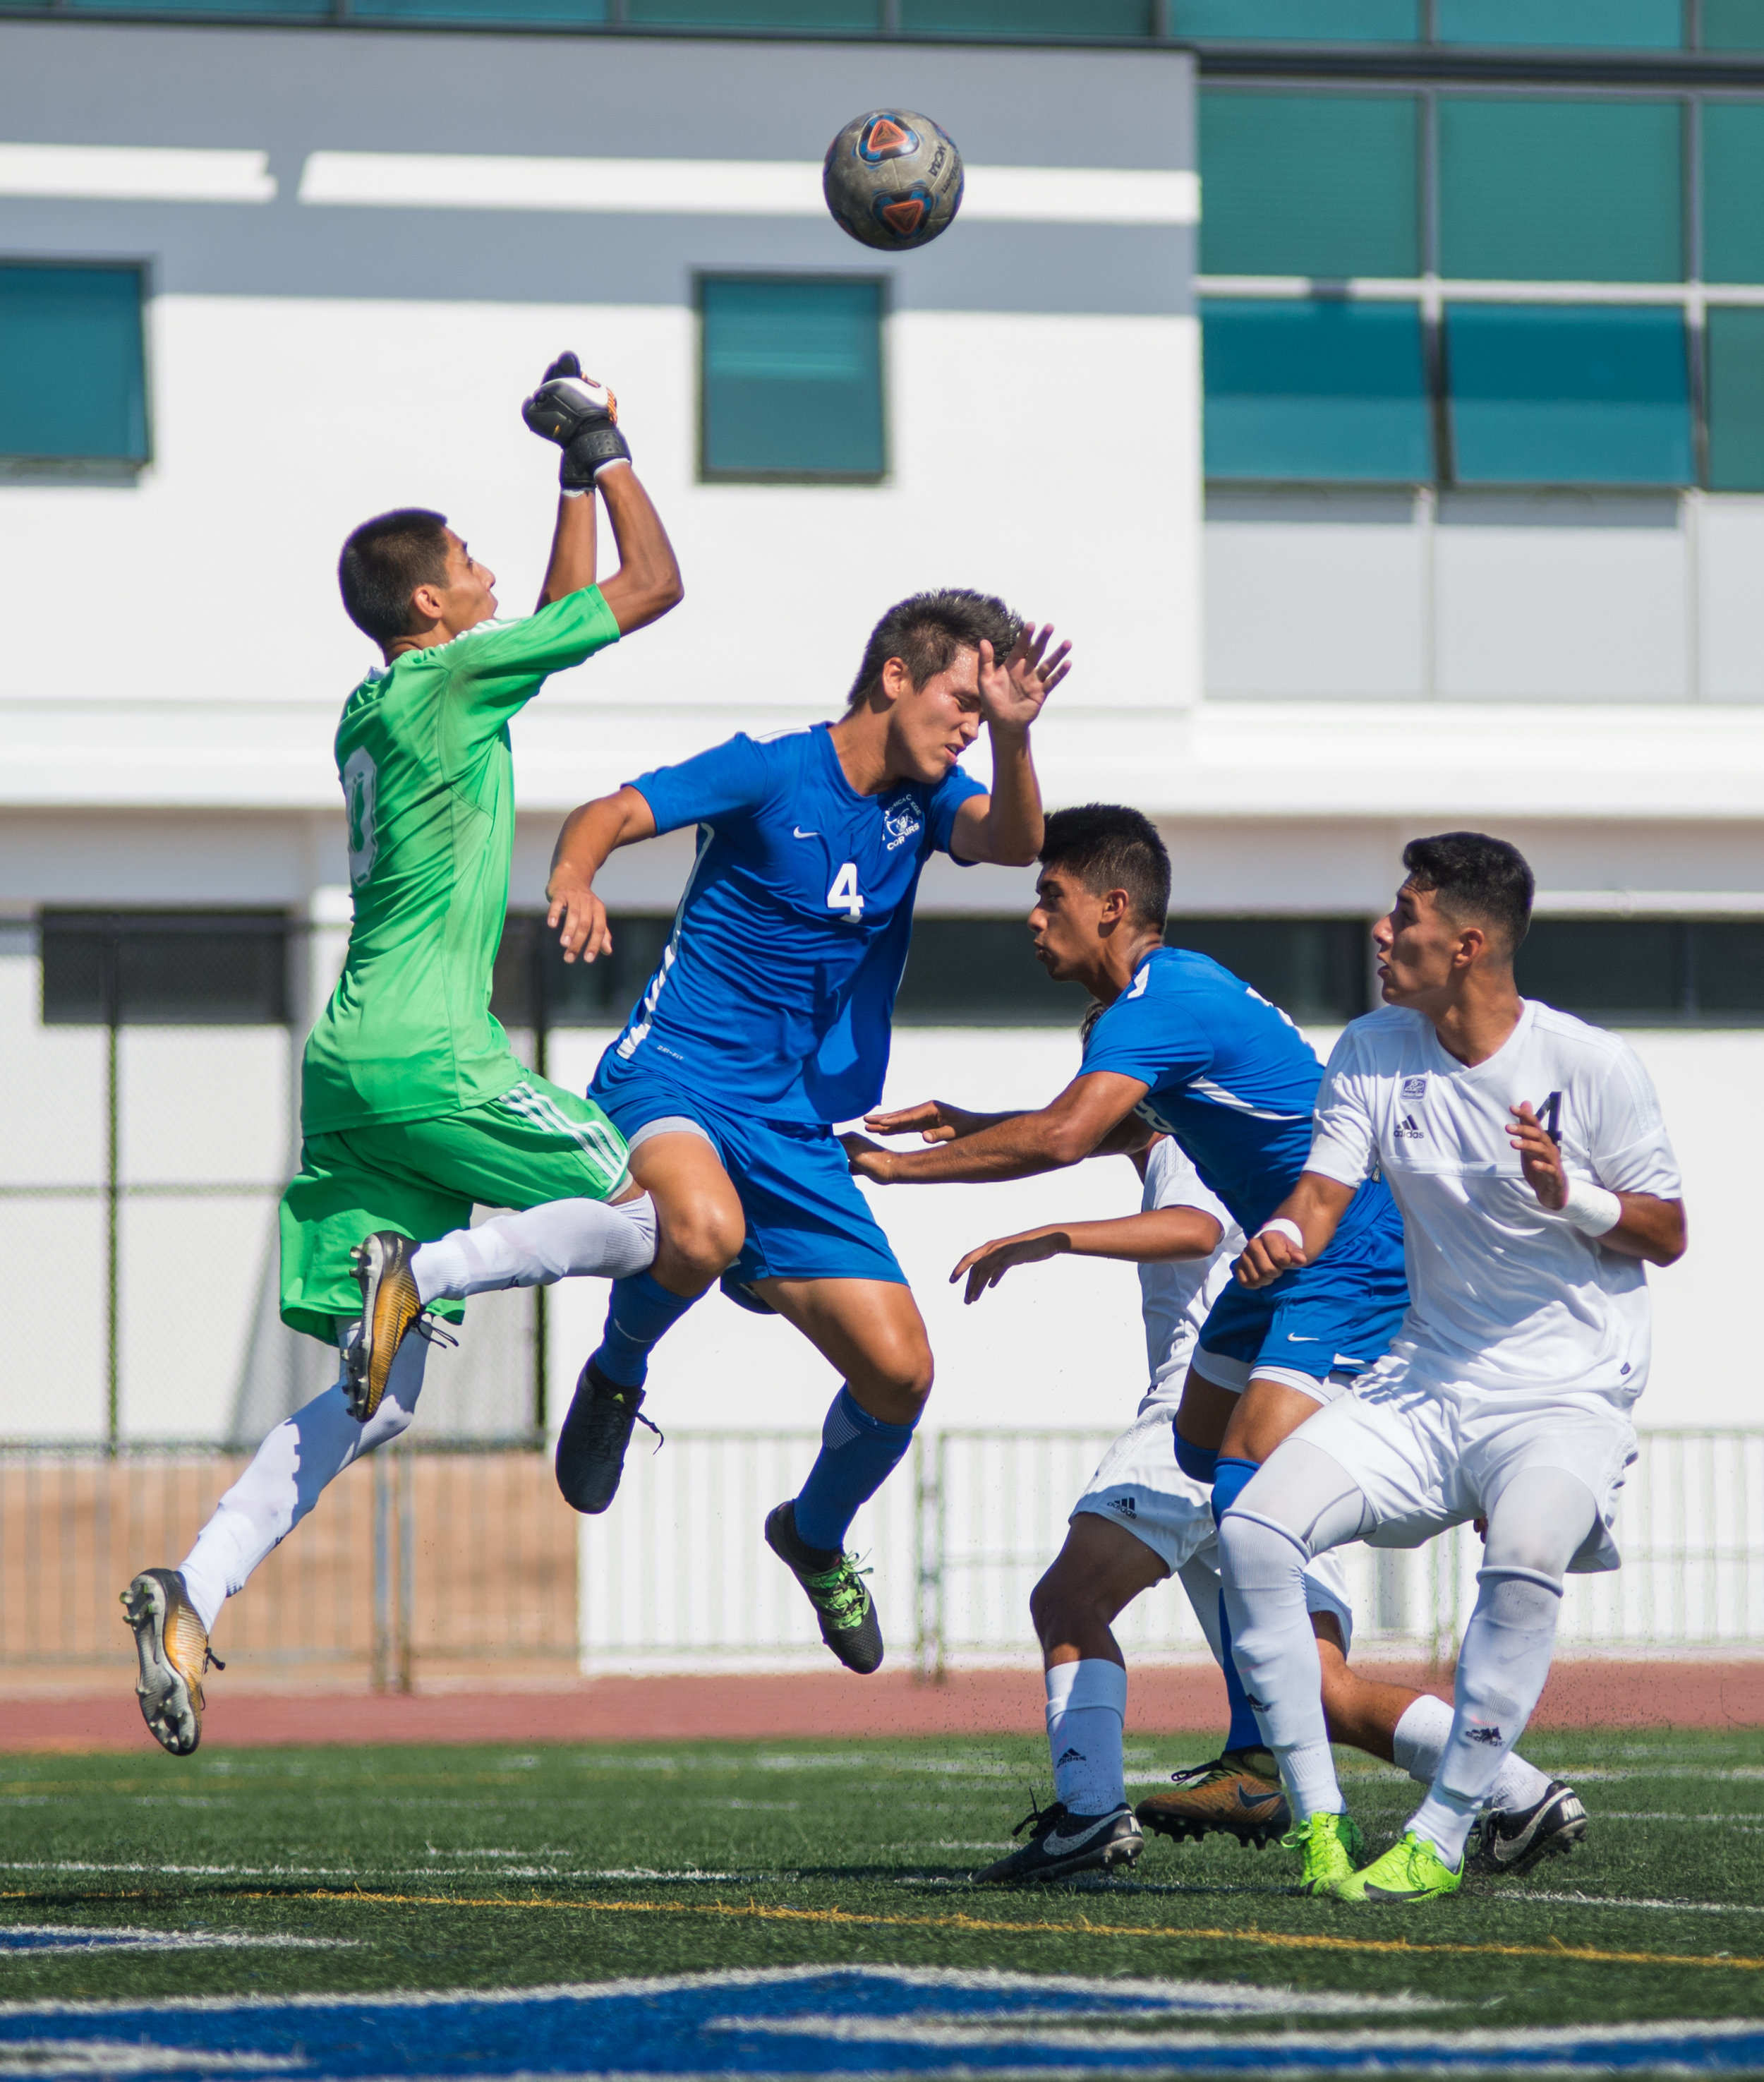  Santa Monica College Corsair Cesar Oliva (4) (CTR) goes up for a header against Citrus College Owl Jorge Quinones (0) (L) on Tuesday September 26, 2017 on the Corsair Field at Santa Monica College in Santa Monica, California. The Corsairs tied the g